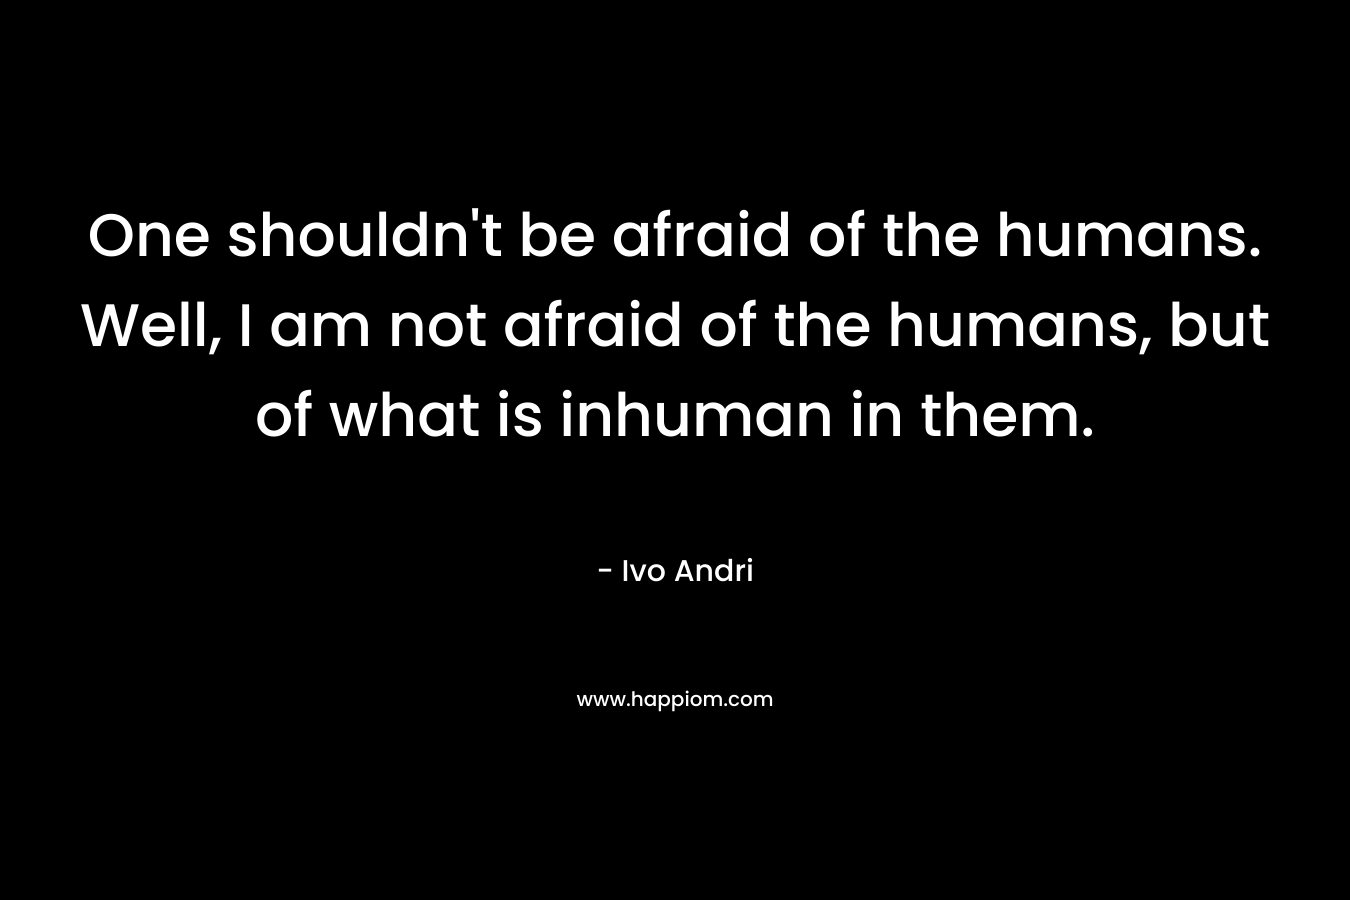 One shouldn't be afraid of the humans. Well, I am not afraid of the humans, but of what is inhuman in them.